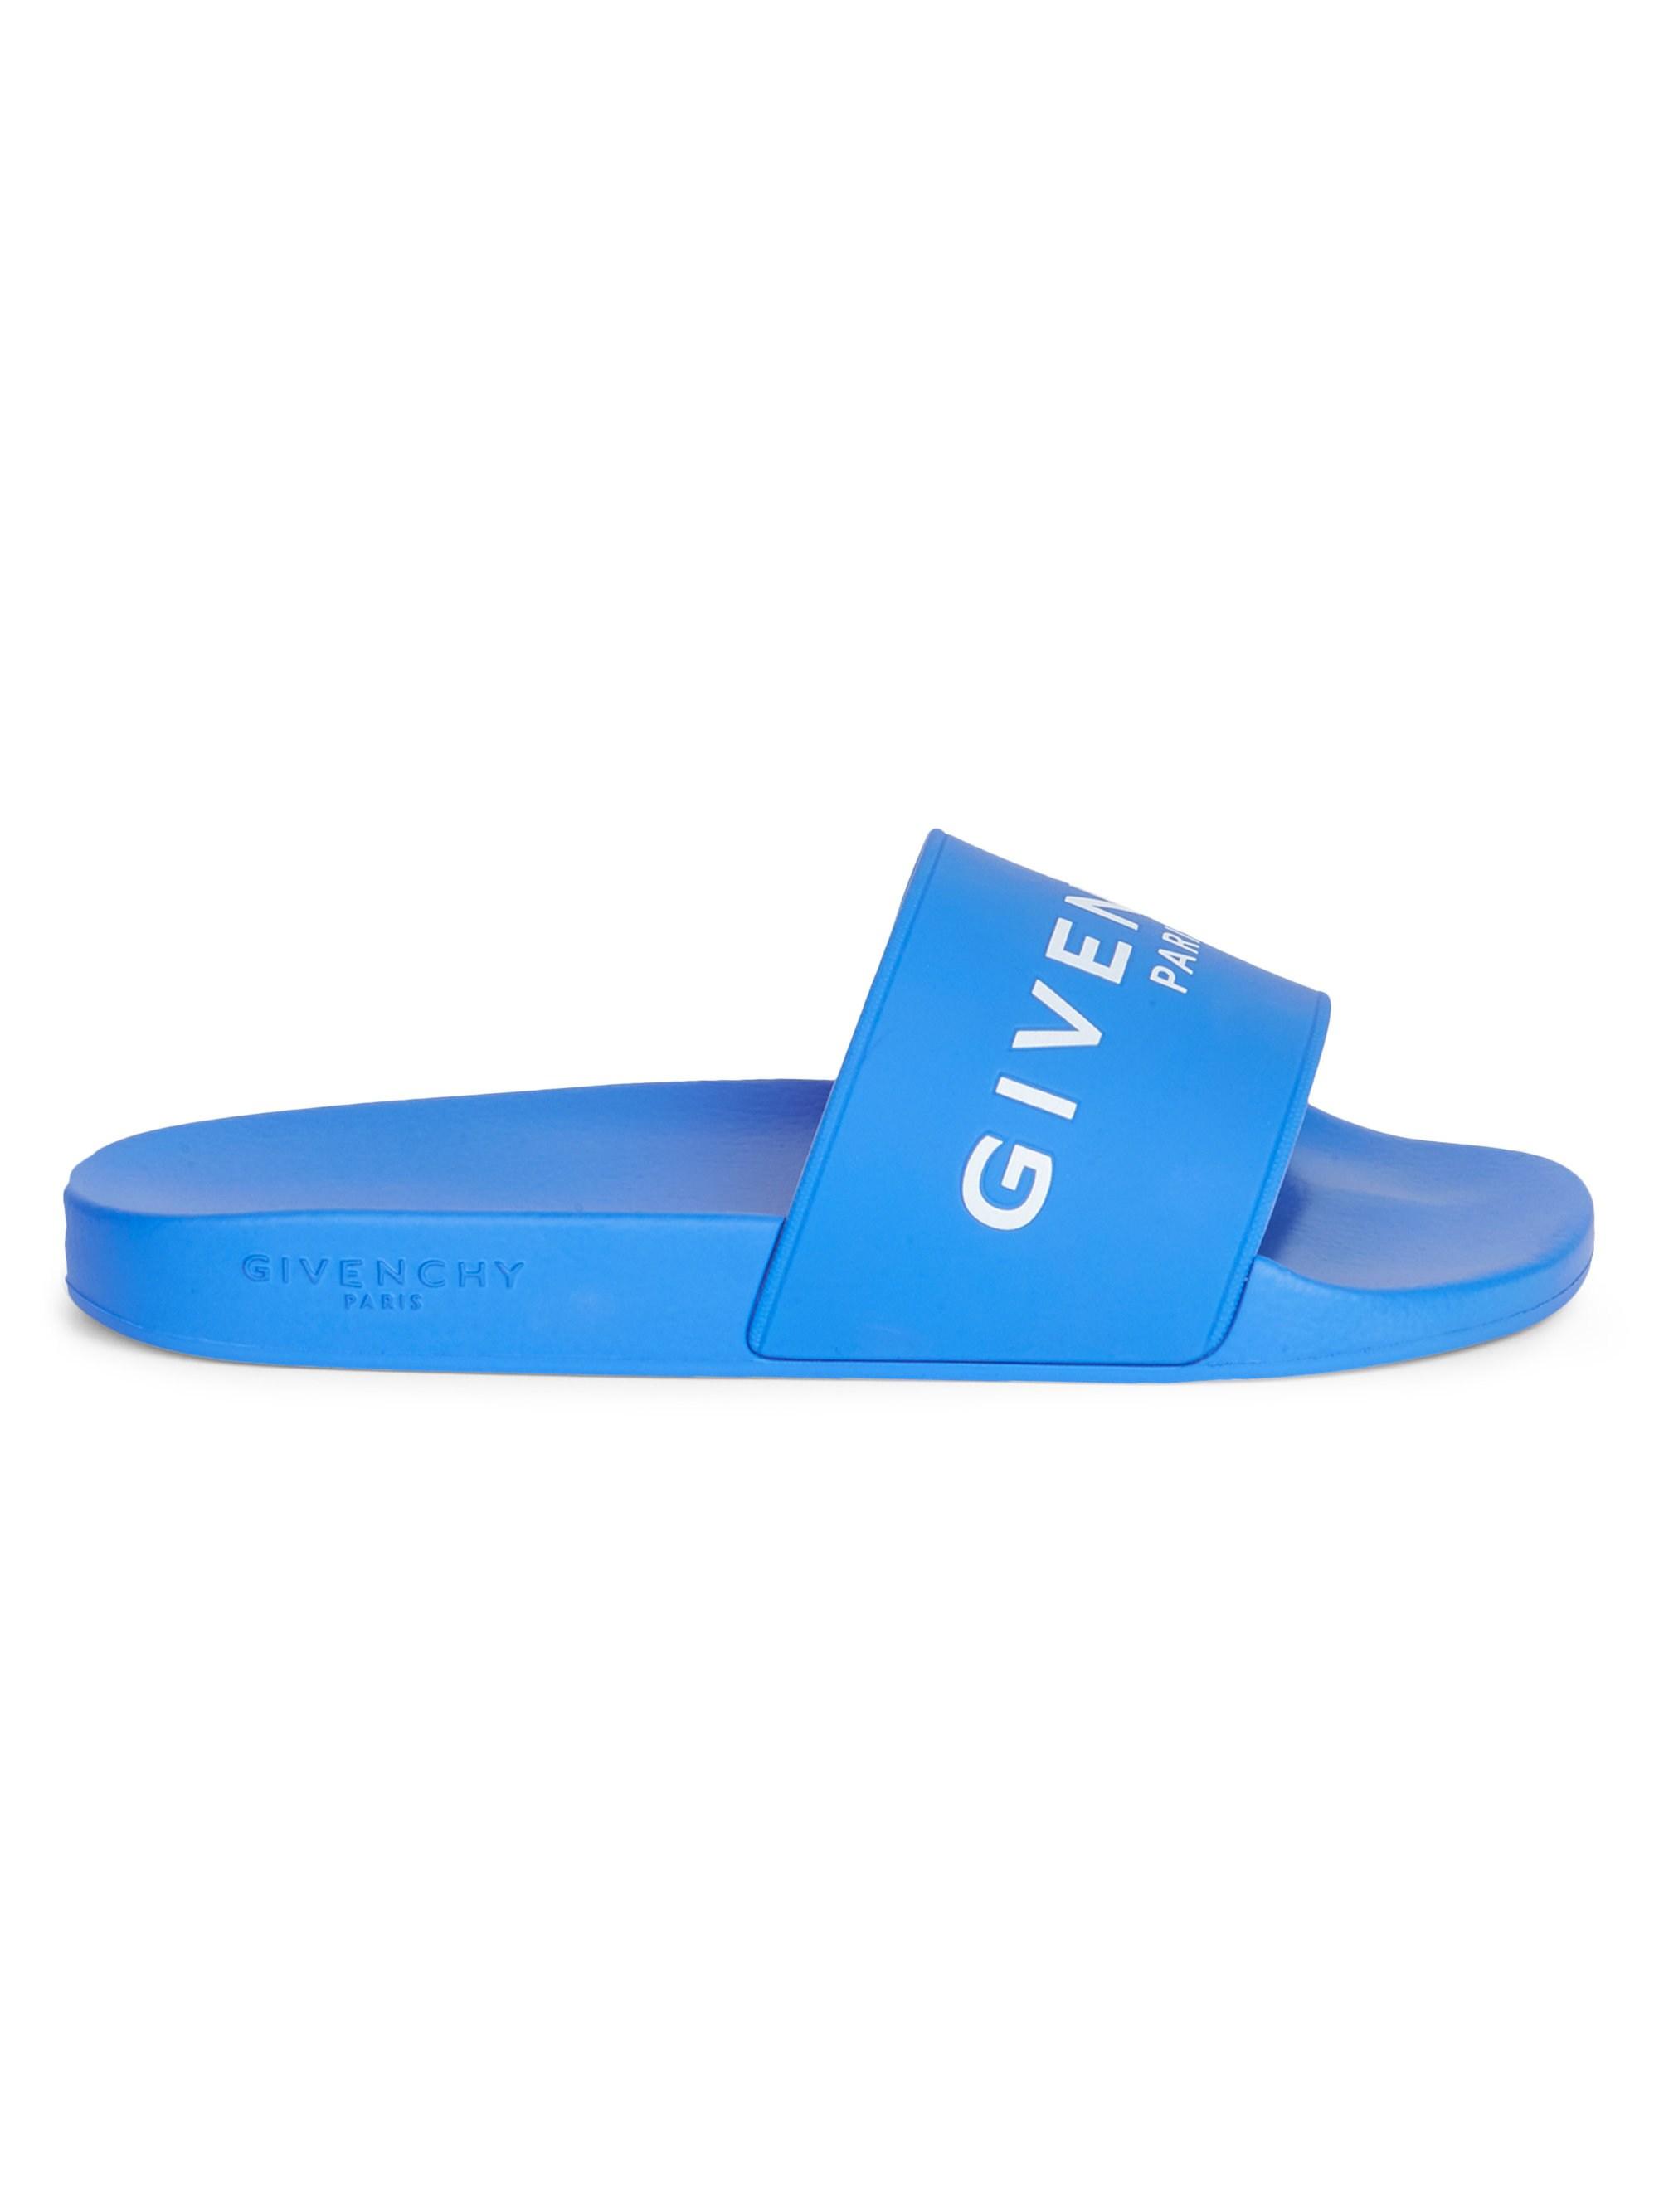 Givenchy Logo Slides in Electric Blue 